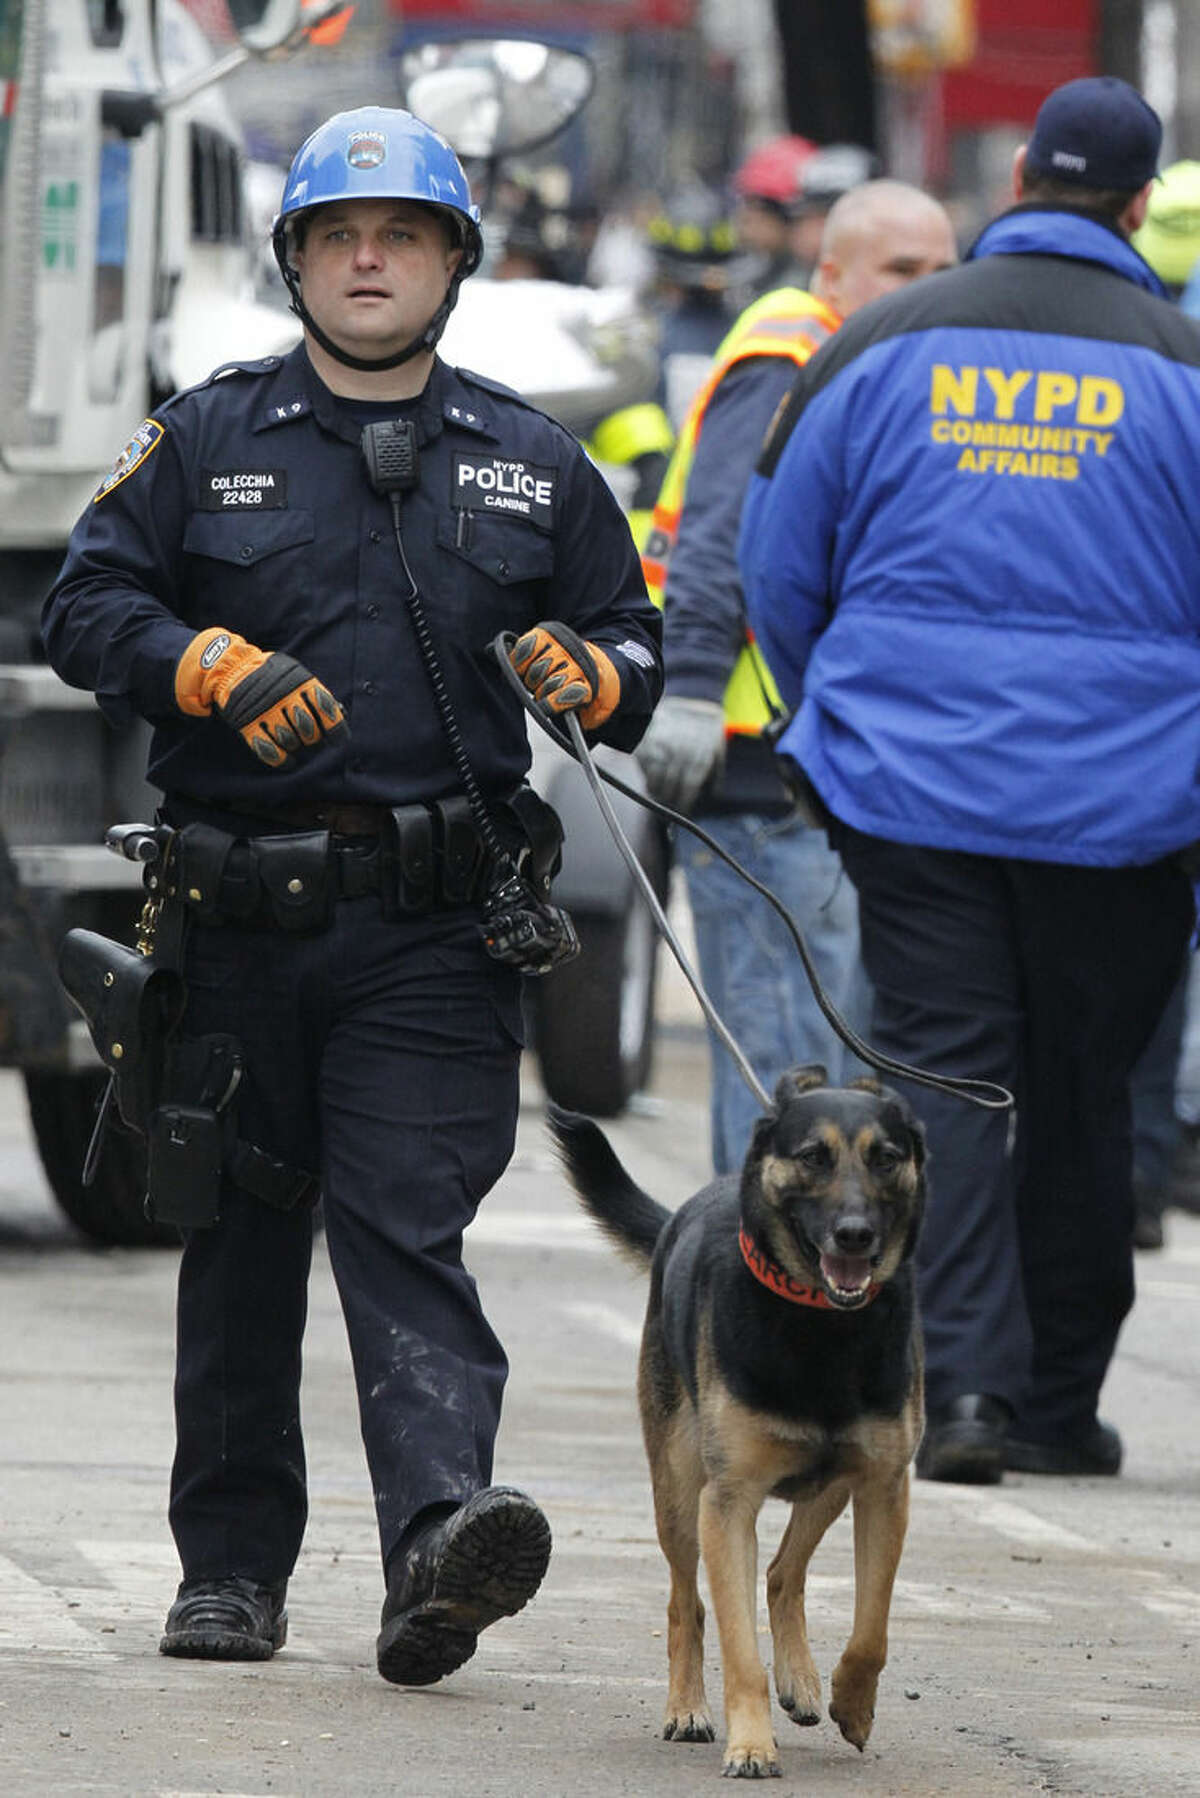 A search dog walks around the site of a building collapse in the East Village neighborhood of New York, Friday, March 27, 2015. Nineteen people were injured, four critically, after the powerful blast and fire sent flames soaring and debris flying Thursday afternoon. Preliminary evidence suggested that a gas explosion amid plumbing and gas work inside the building was to blame. (AP Photo/Julio Cortez)